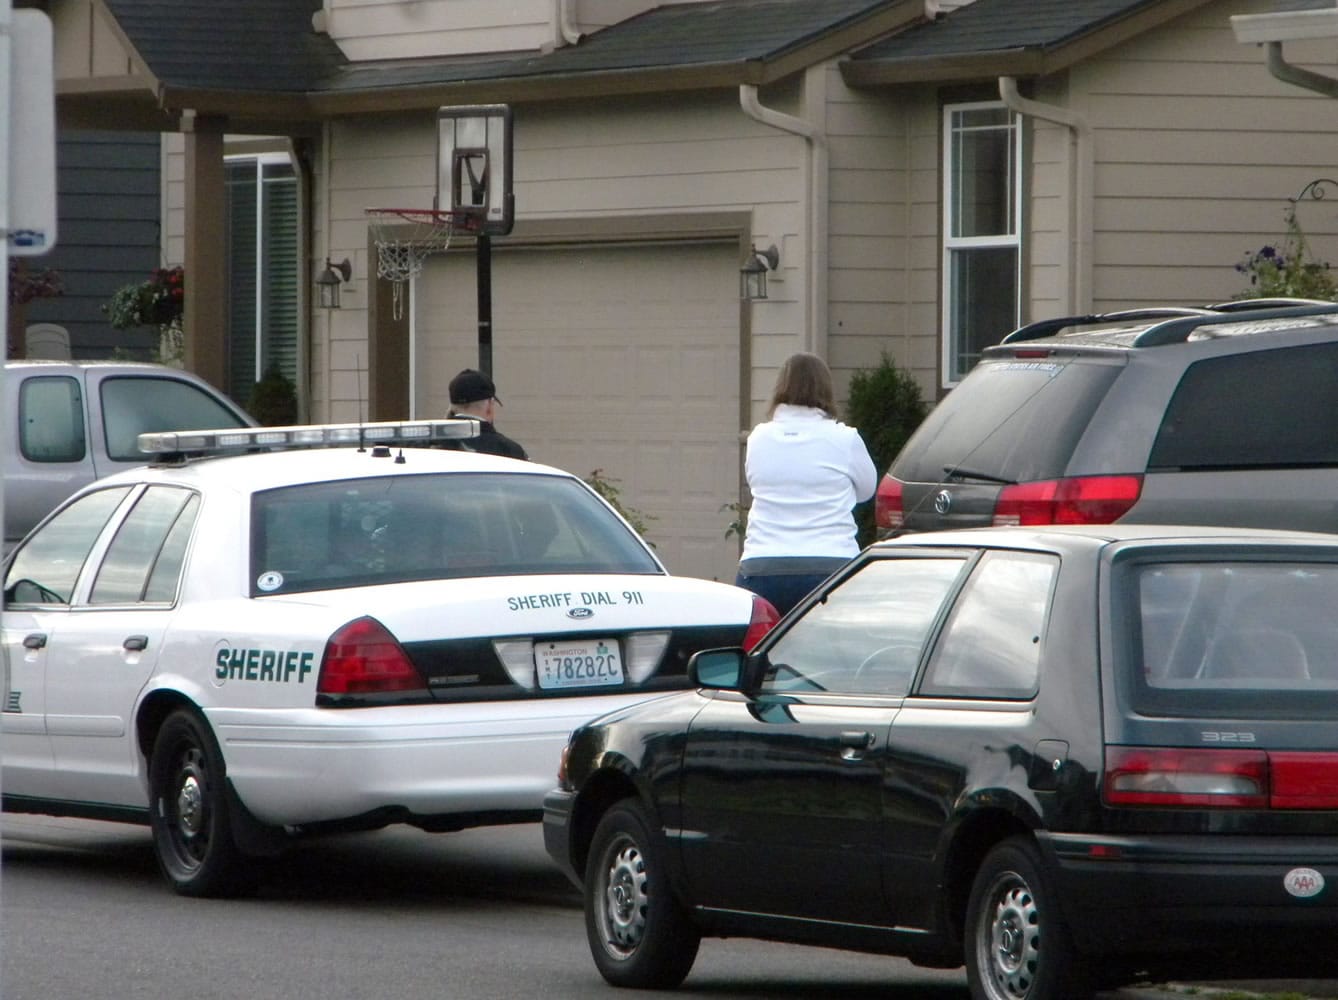 Police, pictured here on Sept. 15, 2010, responded to the Battle Ground home of sheriff's Deputy Ed Owens following the accidental shooting of his 3-year-old son, Ryan.